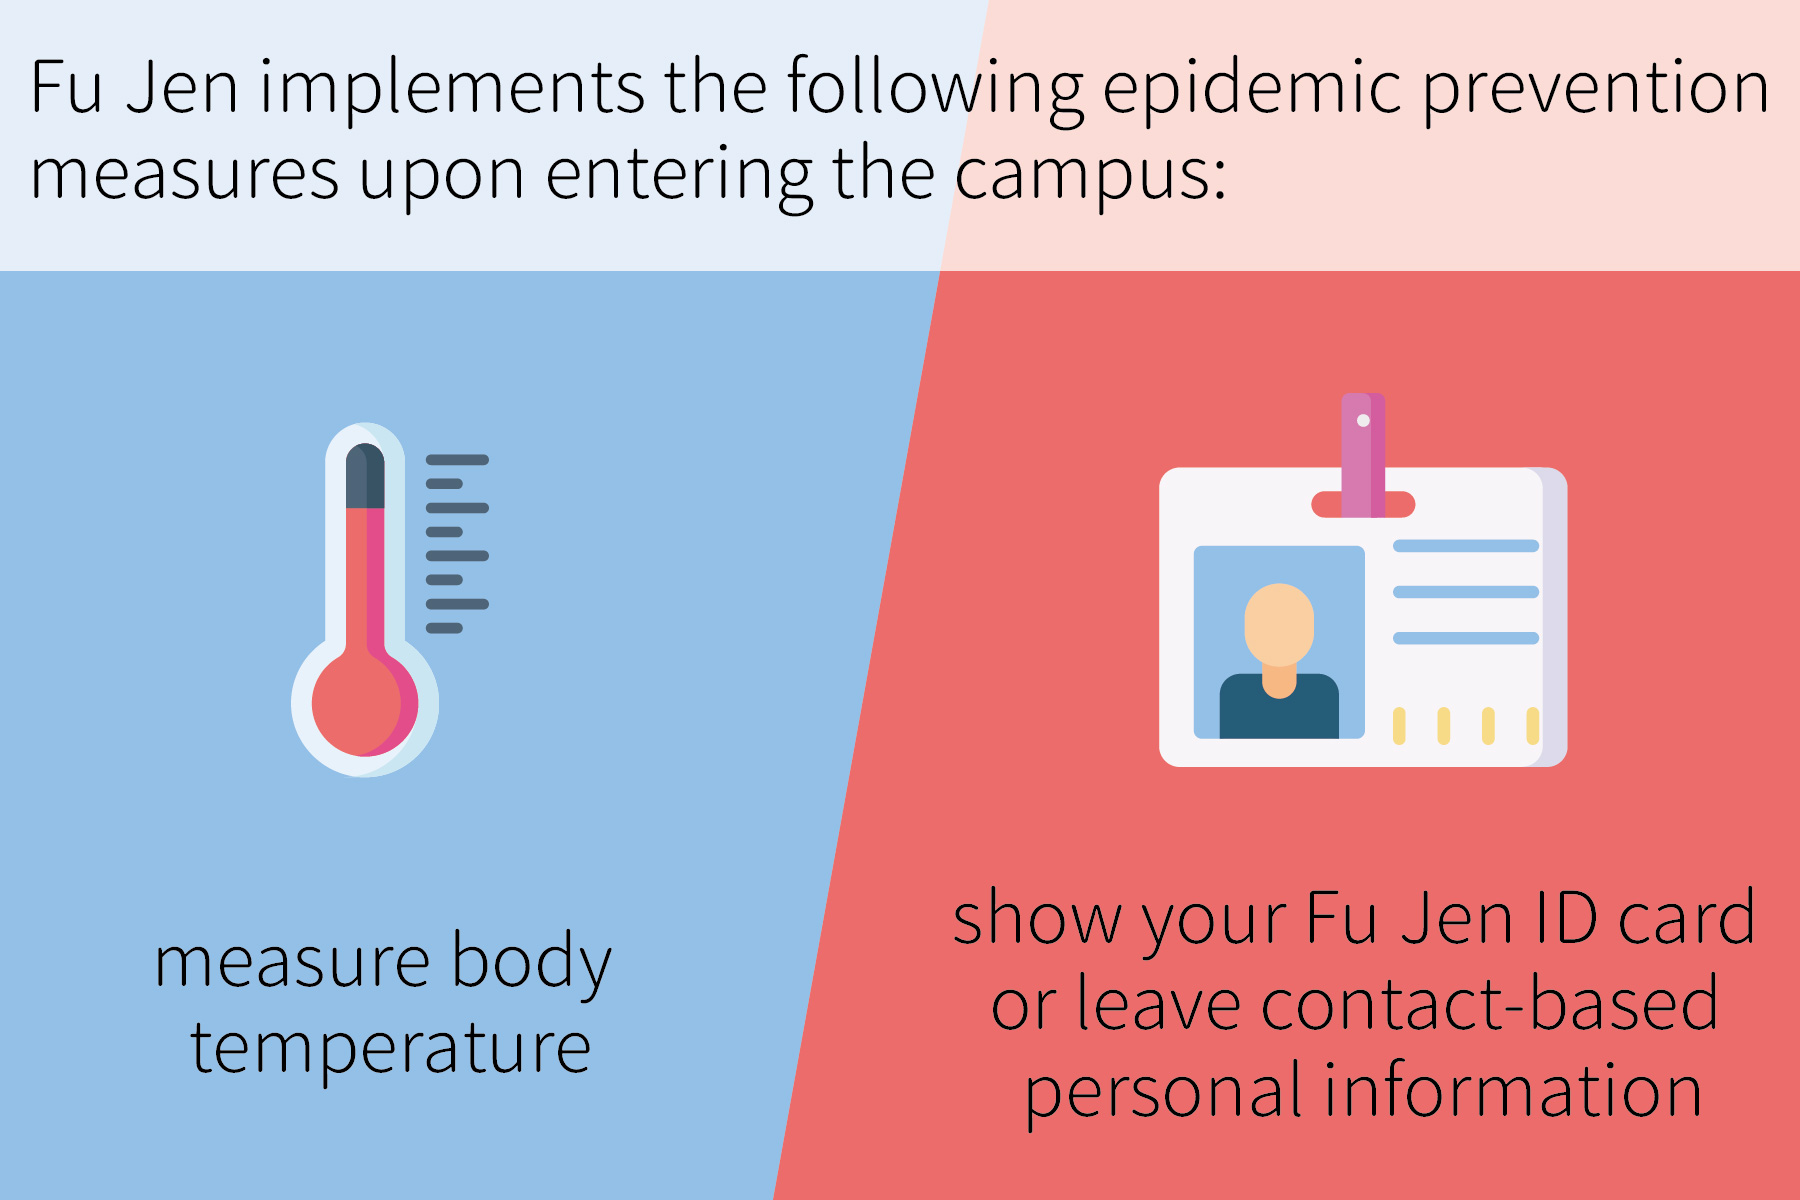 New COVID-19 Prevention Measures for FJCU Campus